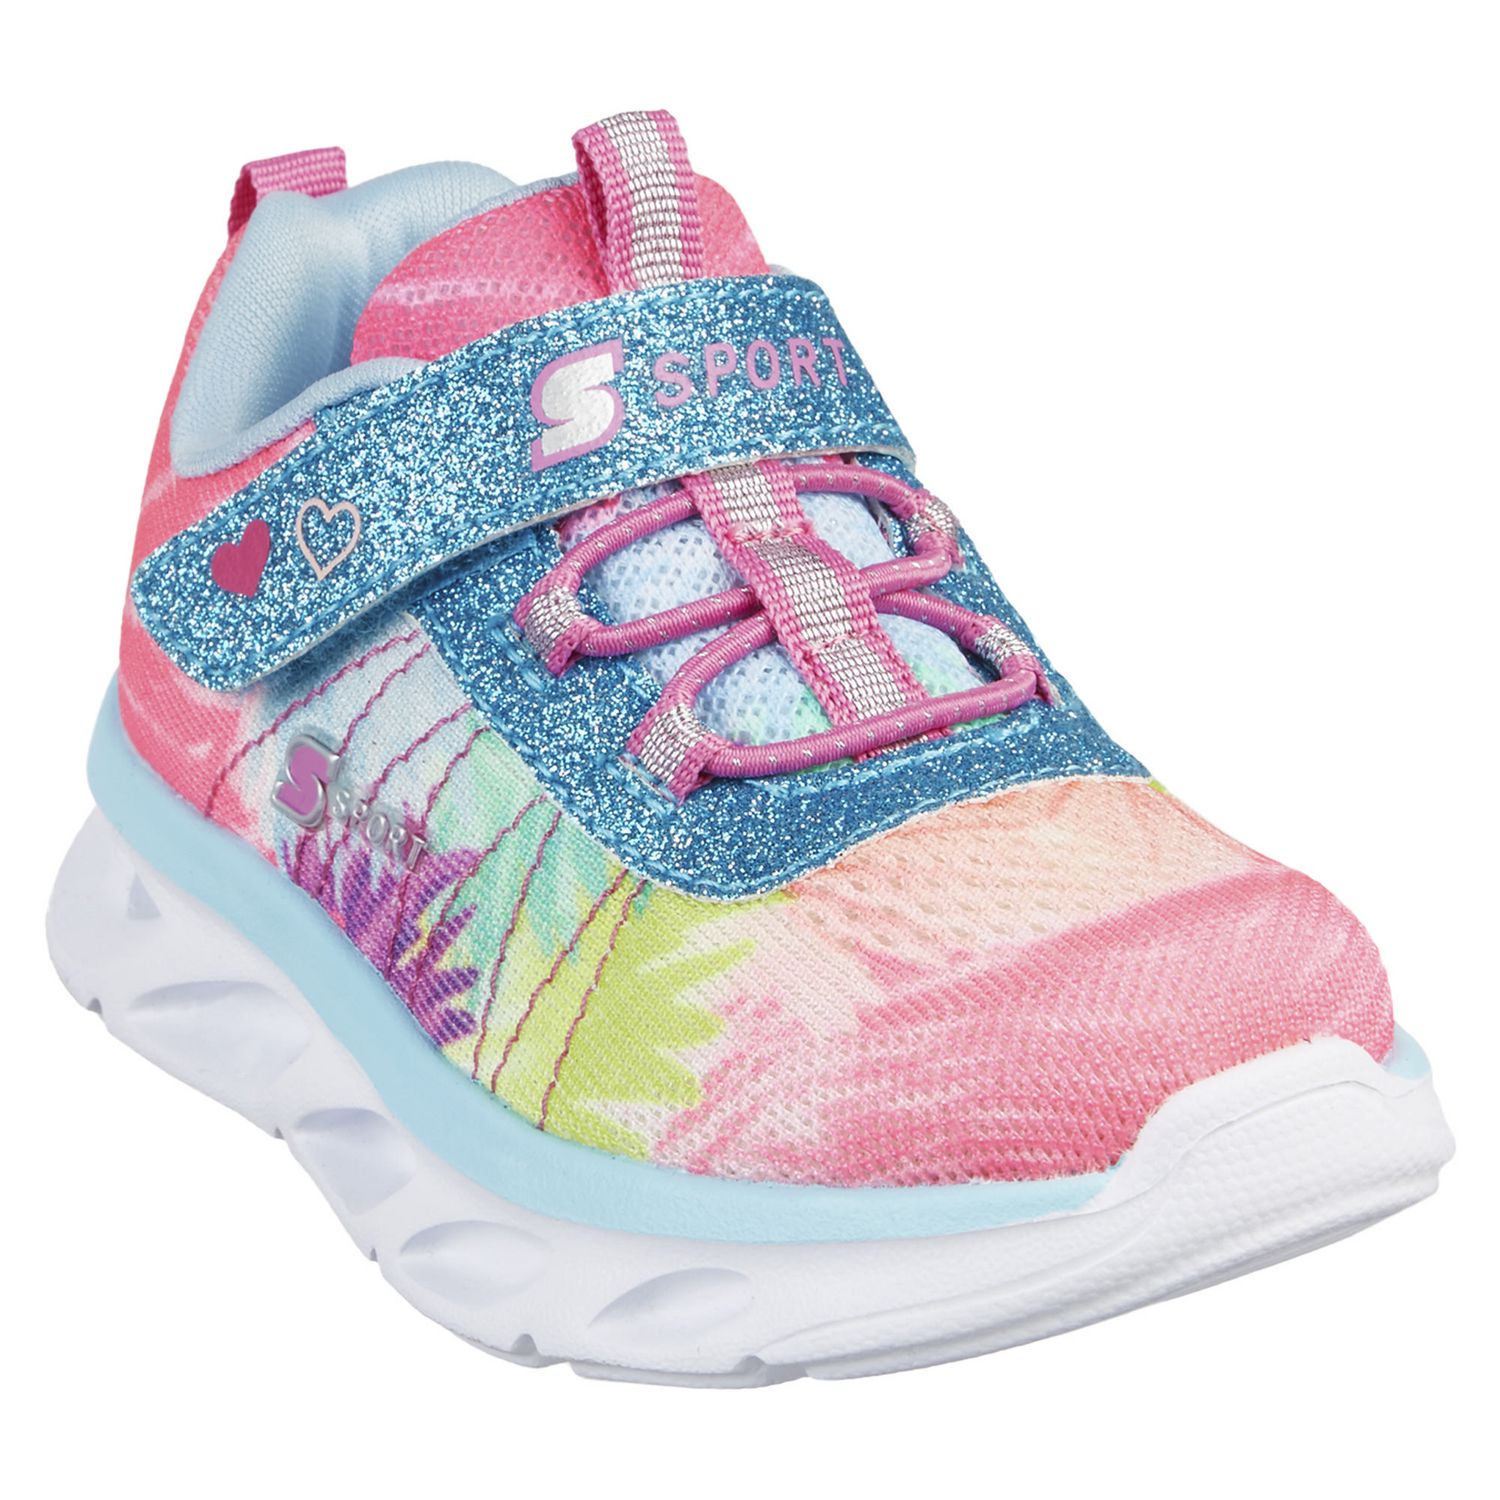 skechers light up shoes canada